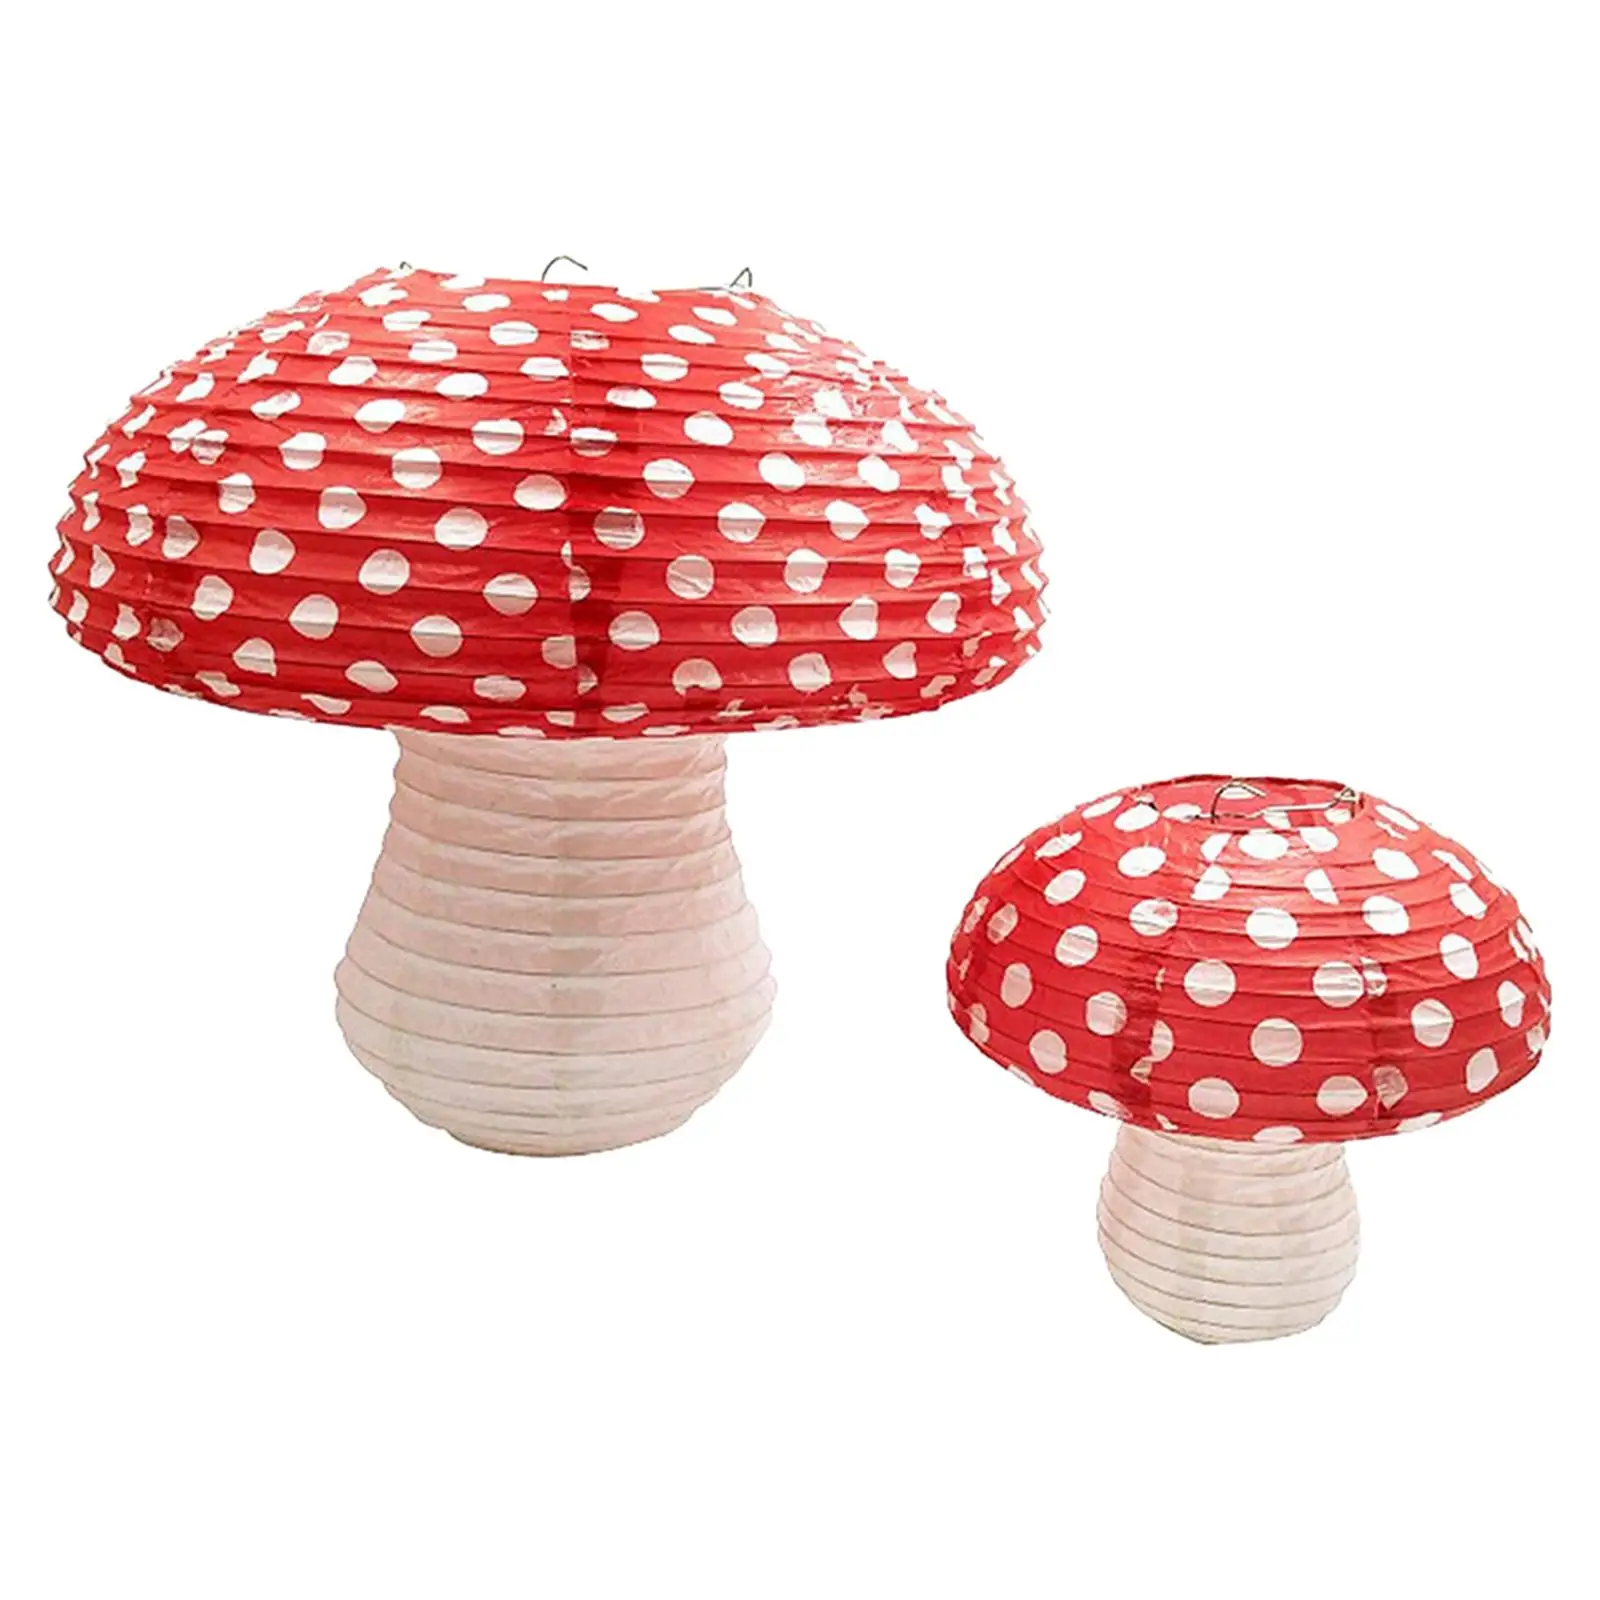 Mushroom Shaped Paper Lanterns Venue Decor Chinese Lanterns Decorative Party Favors for Garden Valentine Wedding Party Gifts